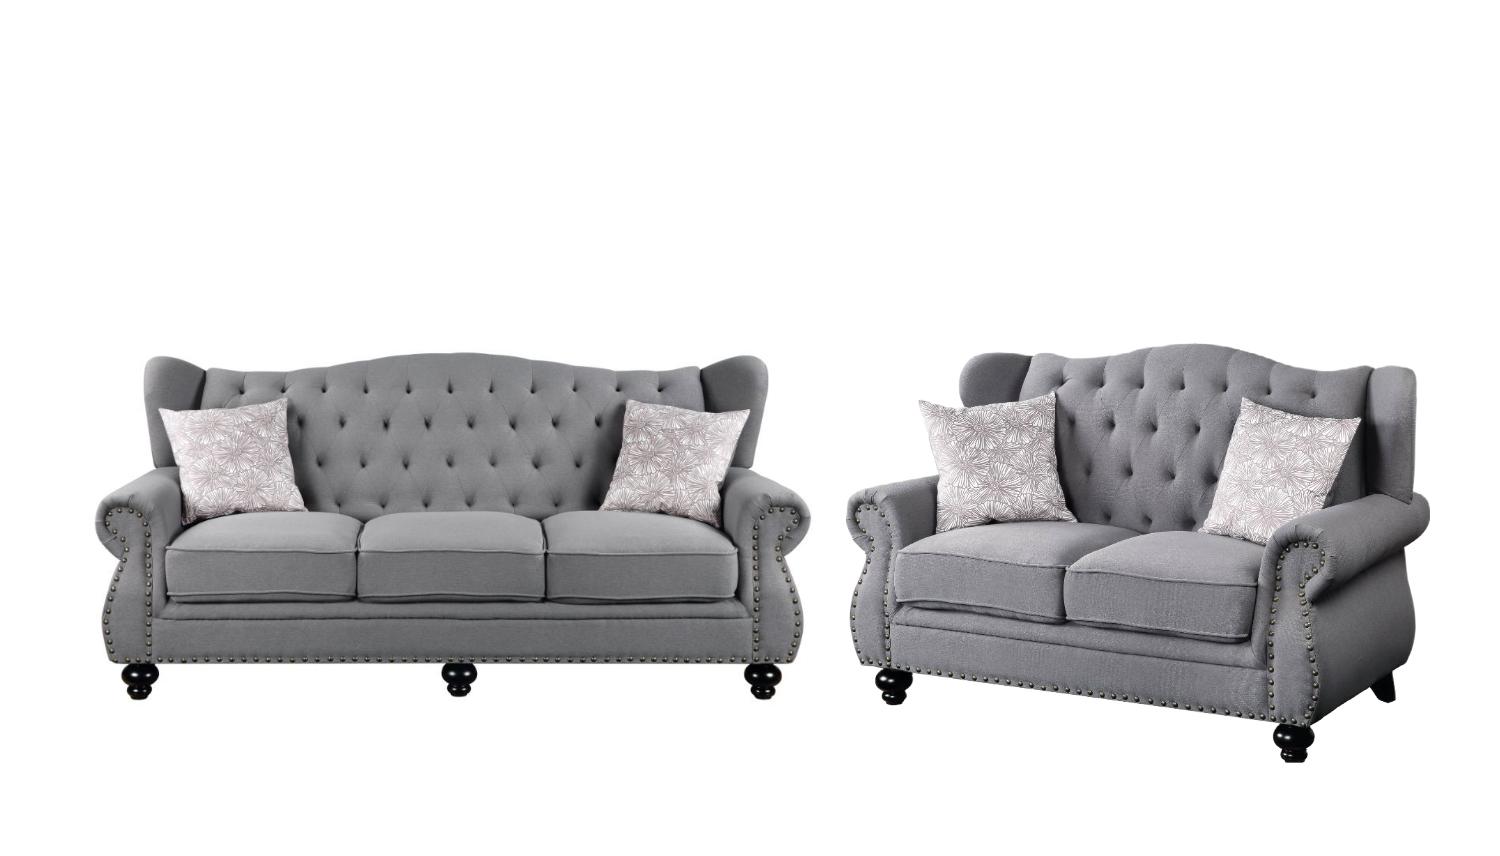 https://nyfurnitureoutlets.com/products/traditional-gray-fabric-sofa-loveseat-by-acme-hannes-53280-2pcs/1x1/313414-1-313620894801.jpg